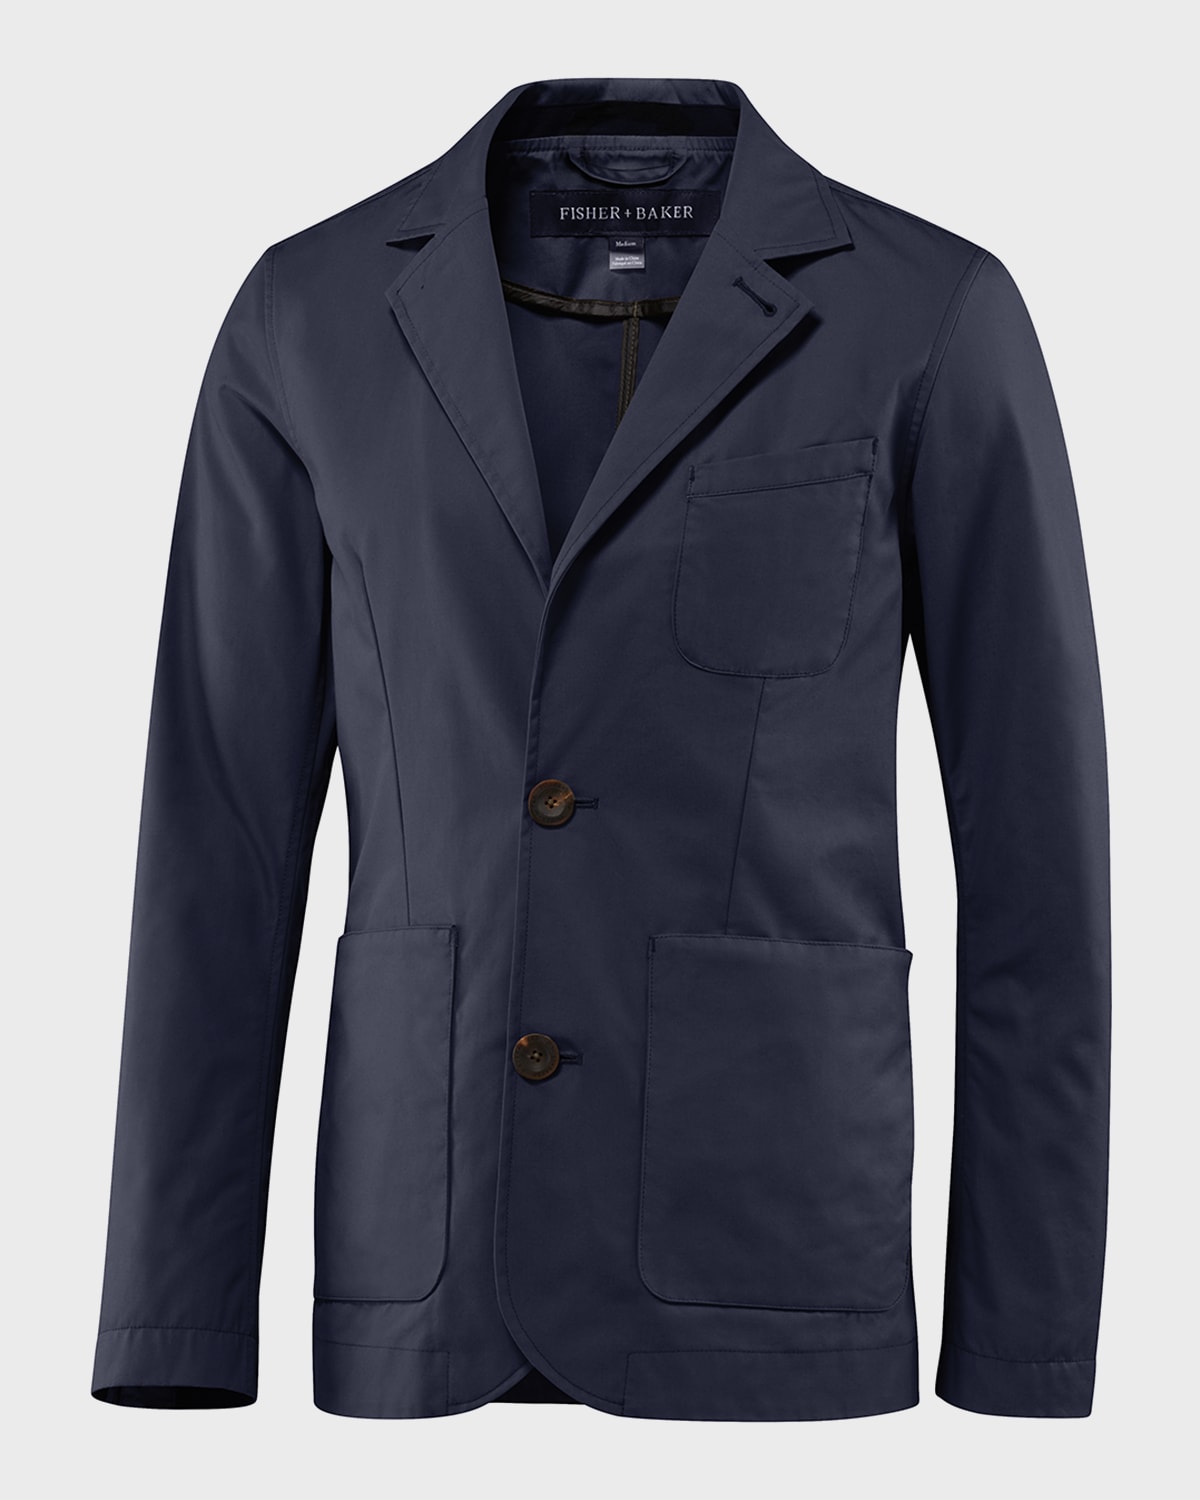 Fisher + Baker Men's Thompson Two-button Jacket In Navy